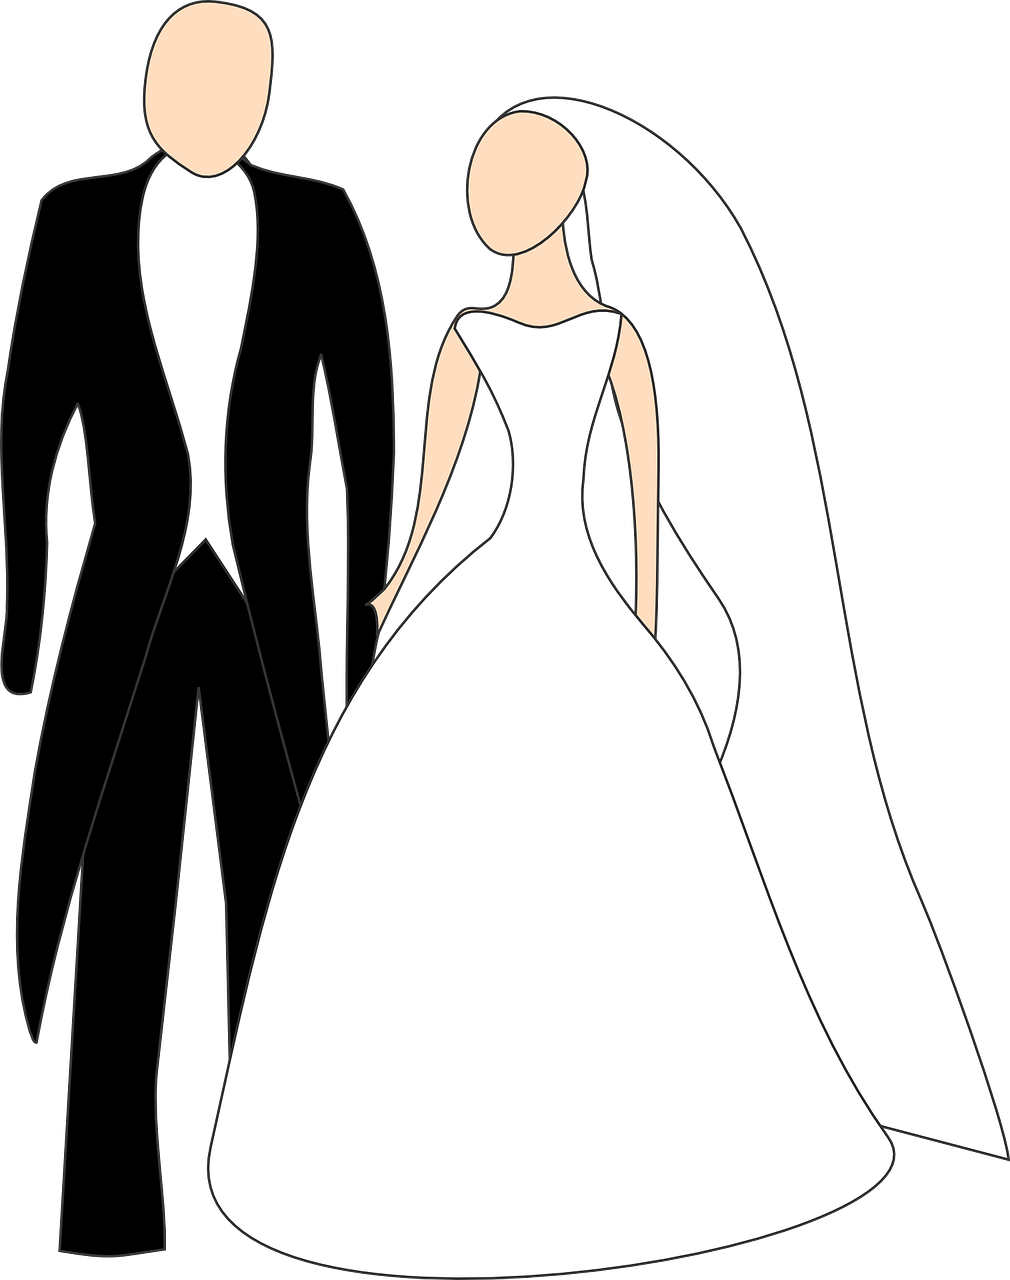 A Man And Woman In Wedding Attire